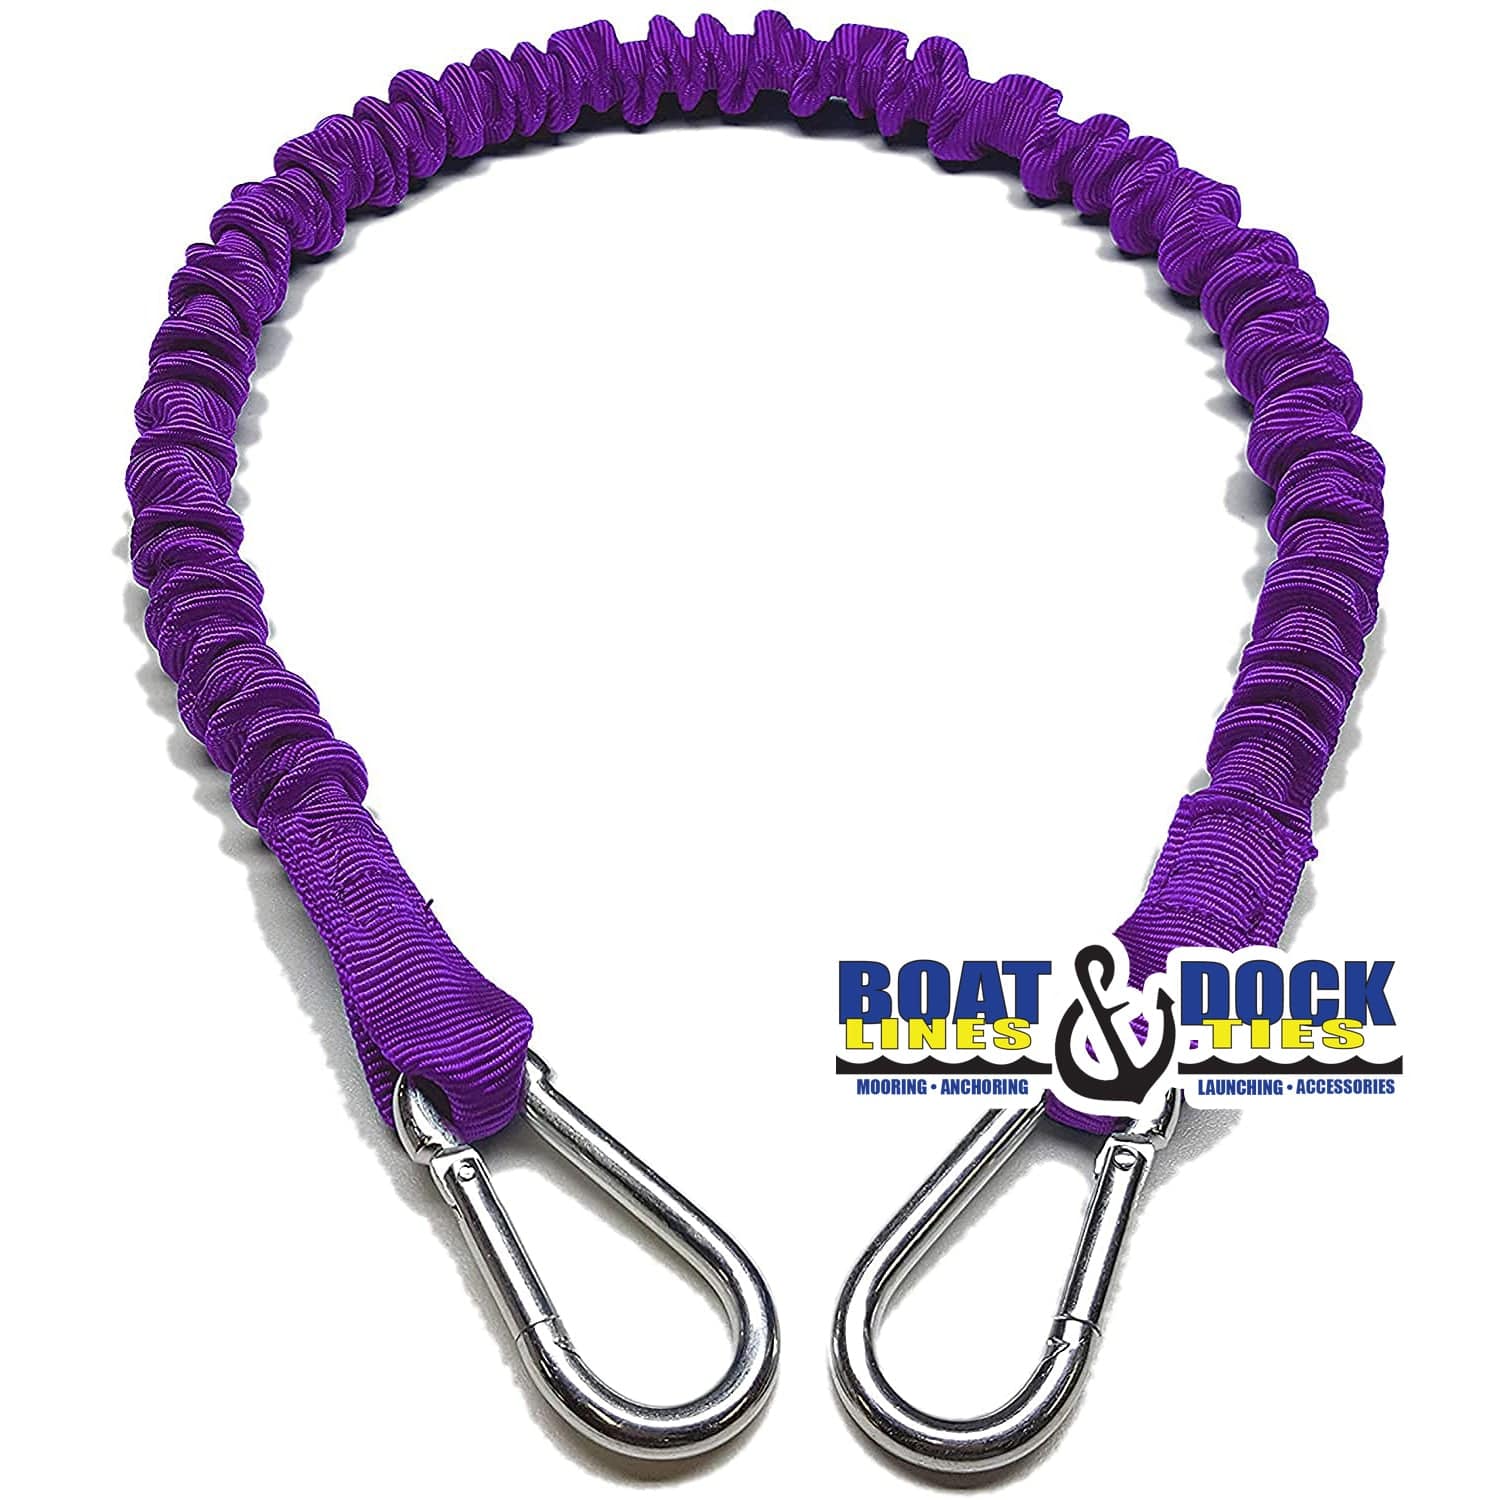 Boat Dock Tie Bungee Cords, 2 Hooked Ends, UV Protected Bungee Cords - Set of 2 - Made in USA - Boat Lines & Dock Ties Boat Lines & Dock Ties 24" / Purple